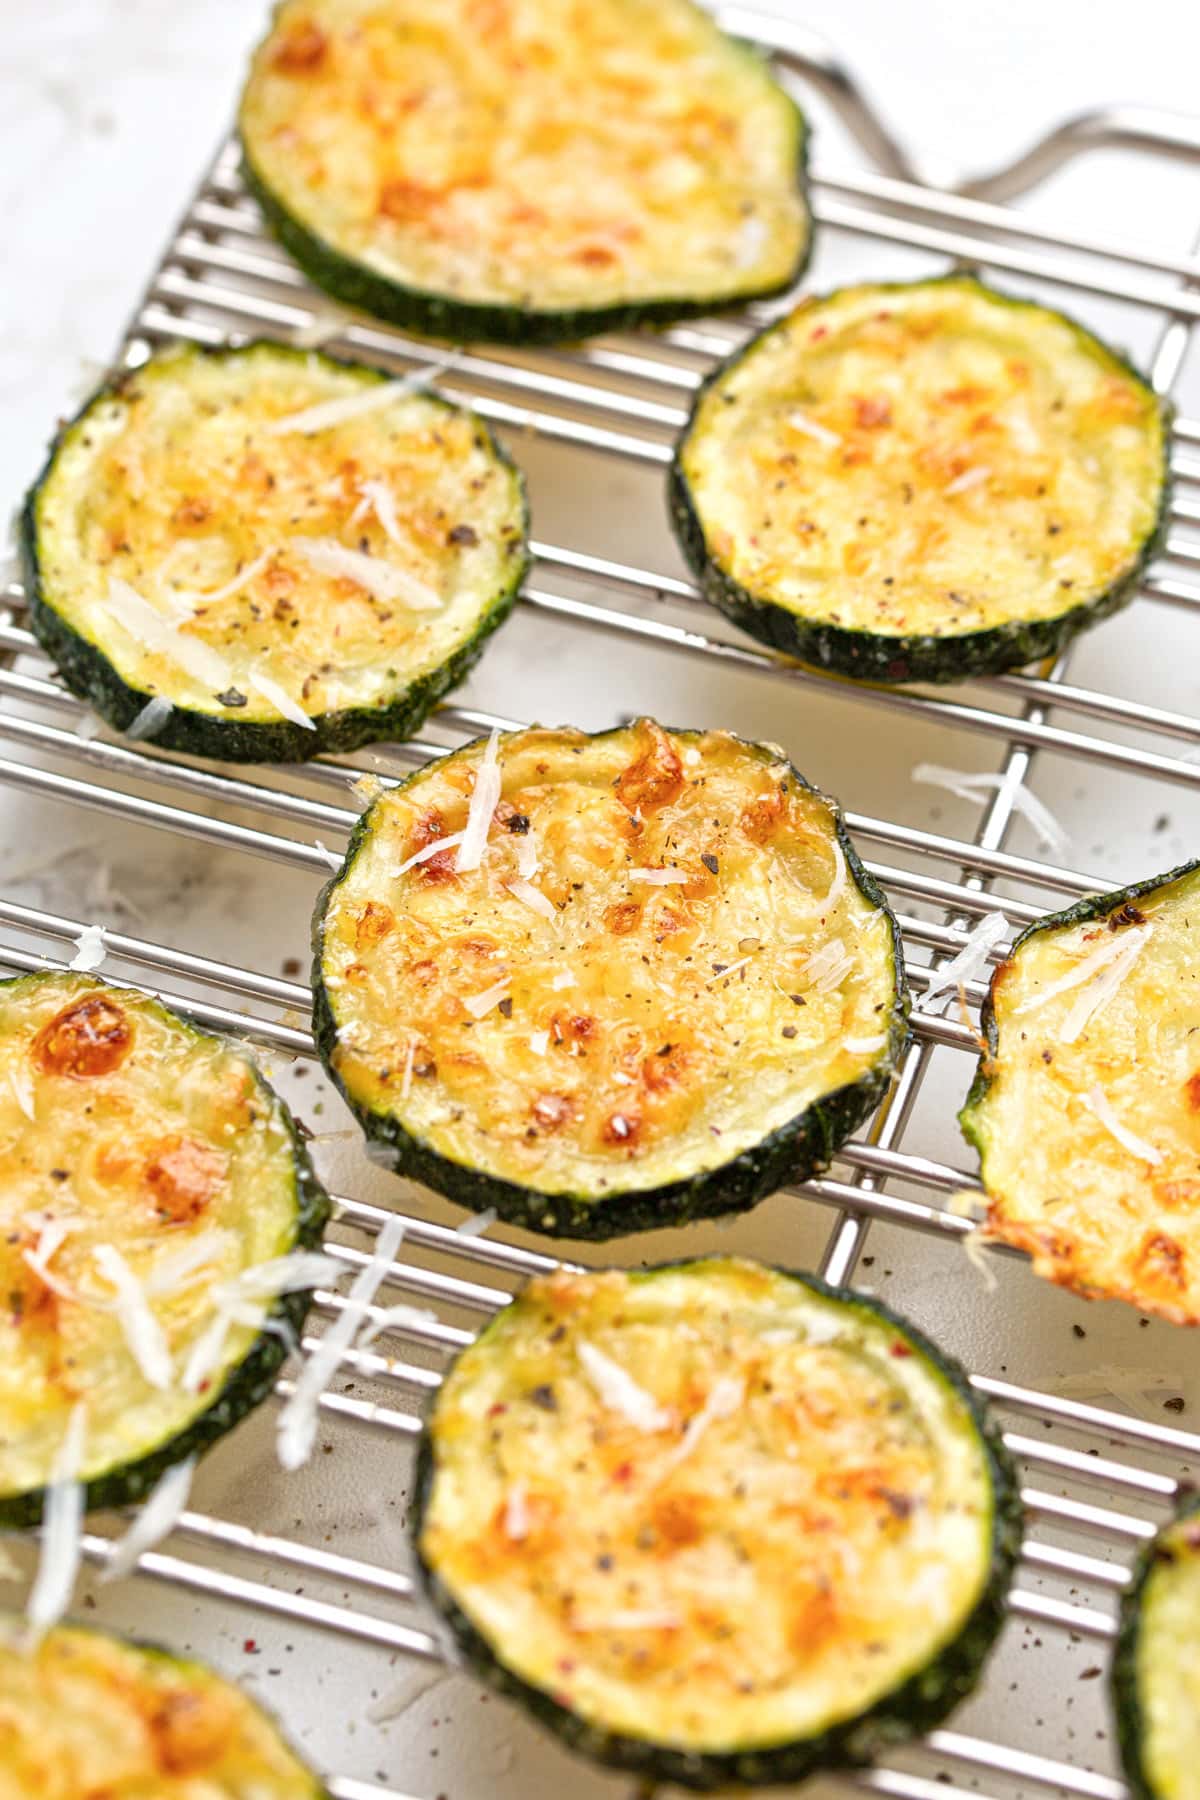 Roasted Parmesan zucchini arranged on a baking rack and topped with freshly grated Parmesan cheese.